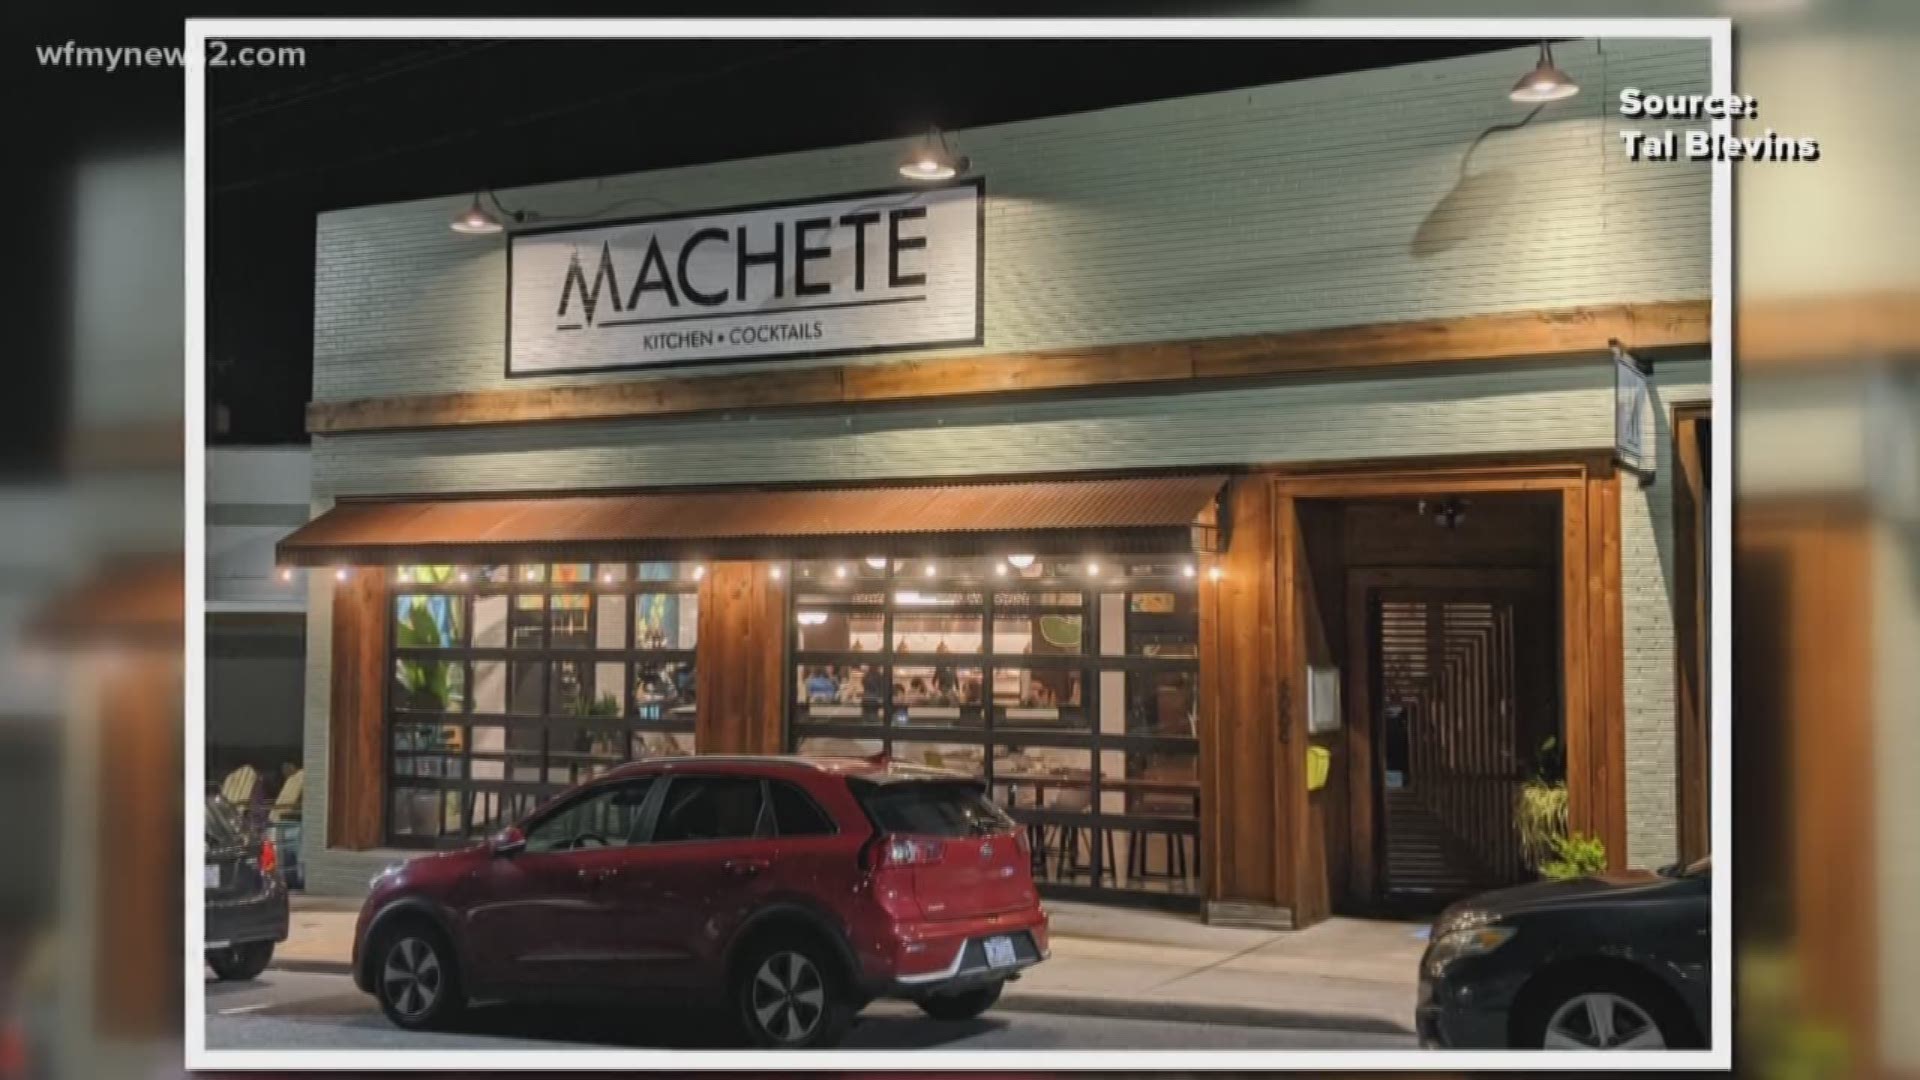 Machete, a Greensboro restaurant, held its grand opening one week before the coronavirus hit our state. The owner said they've had to pivot and adjust to stay open.